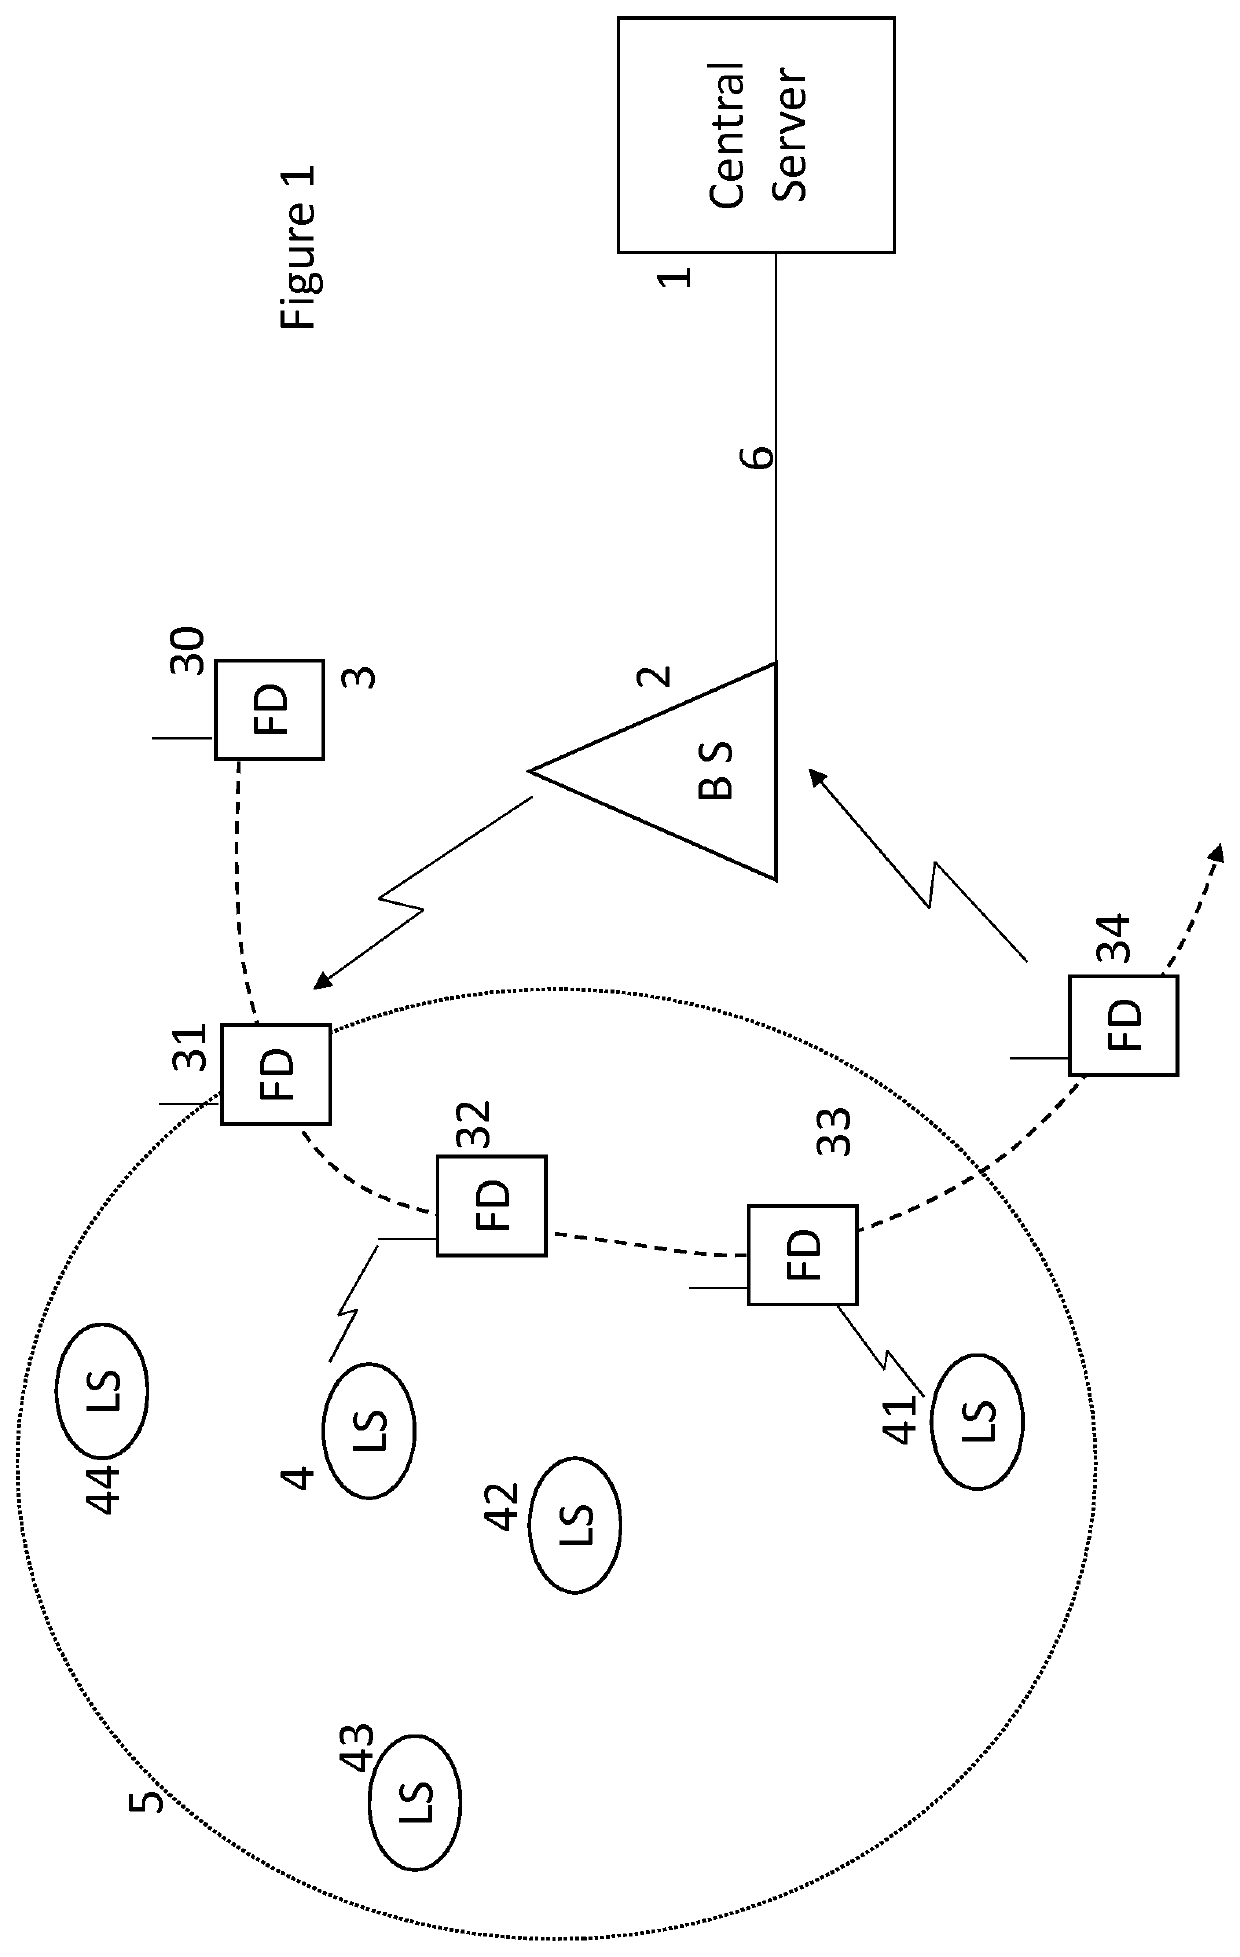 Authentication of data transmission devices